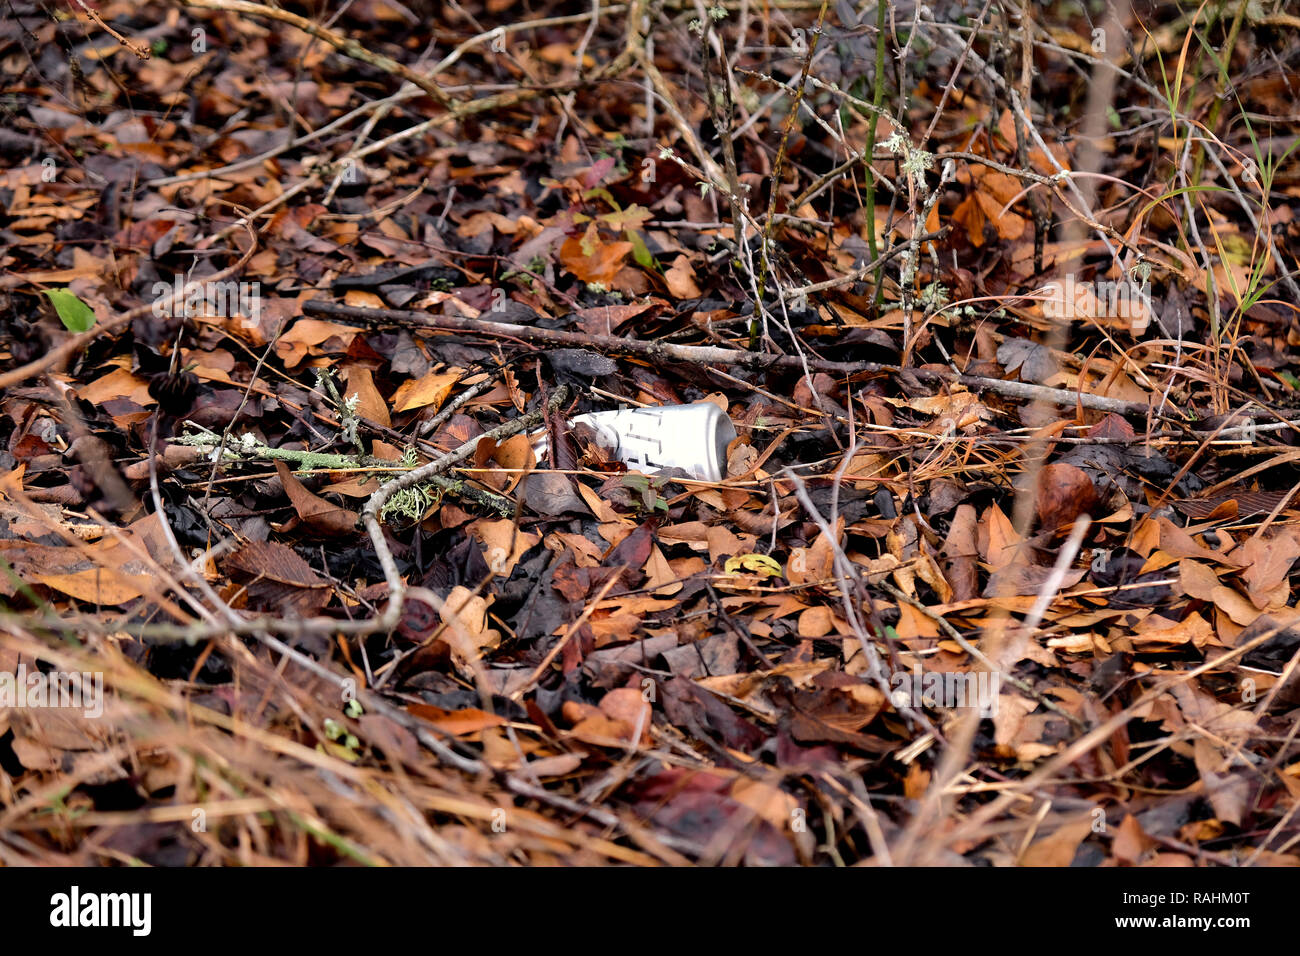 Empty beer can thrown on the ground amid leaves in nature; aluminum pollution; trash in nature. Stock Photo